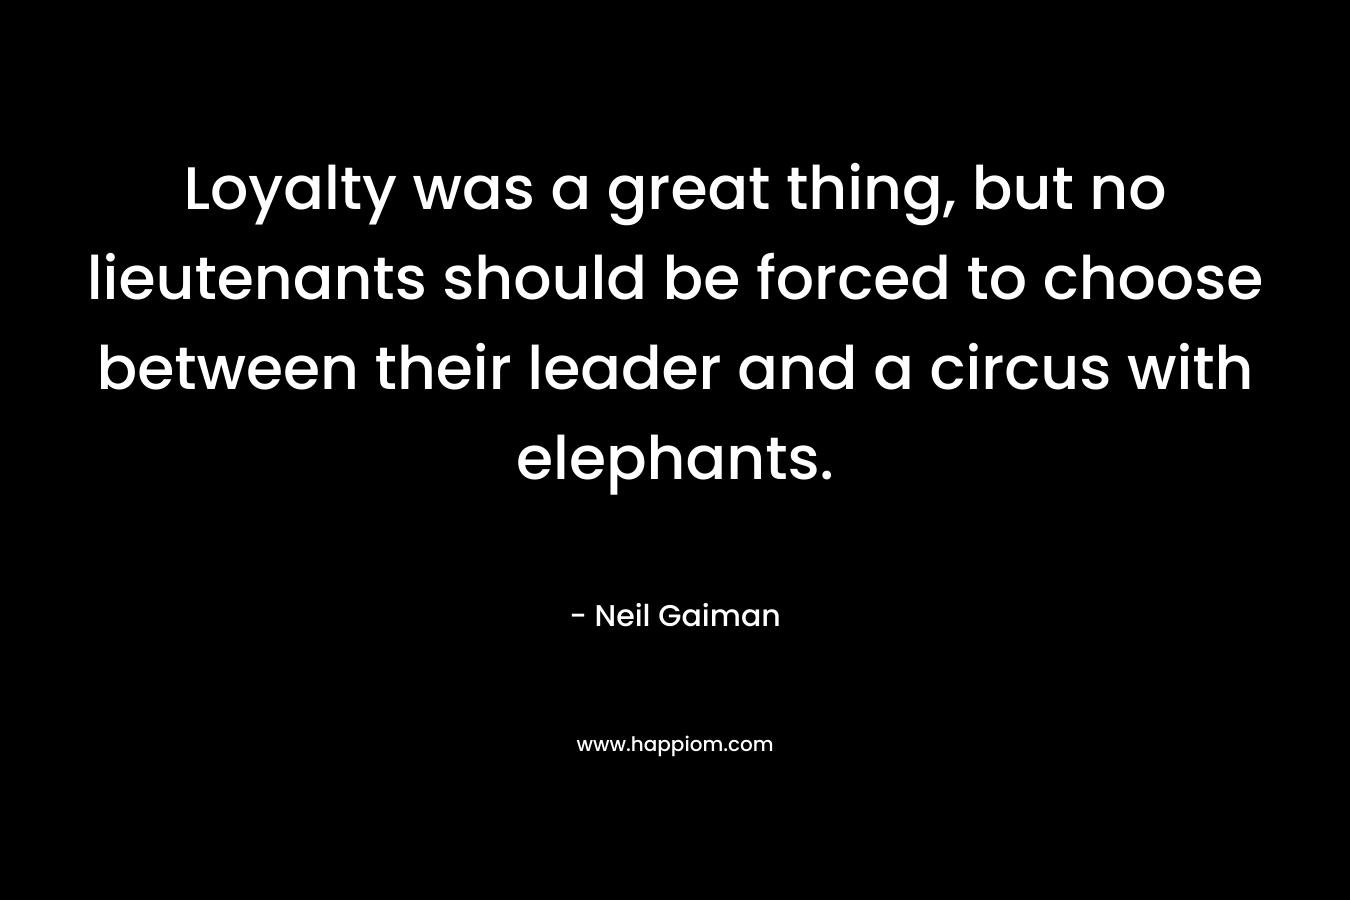 Loyalty was a great thing, but no lieutenants should be forced to choose between their leader and a circus with elephants. – Neil Gaiman